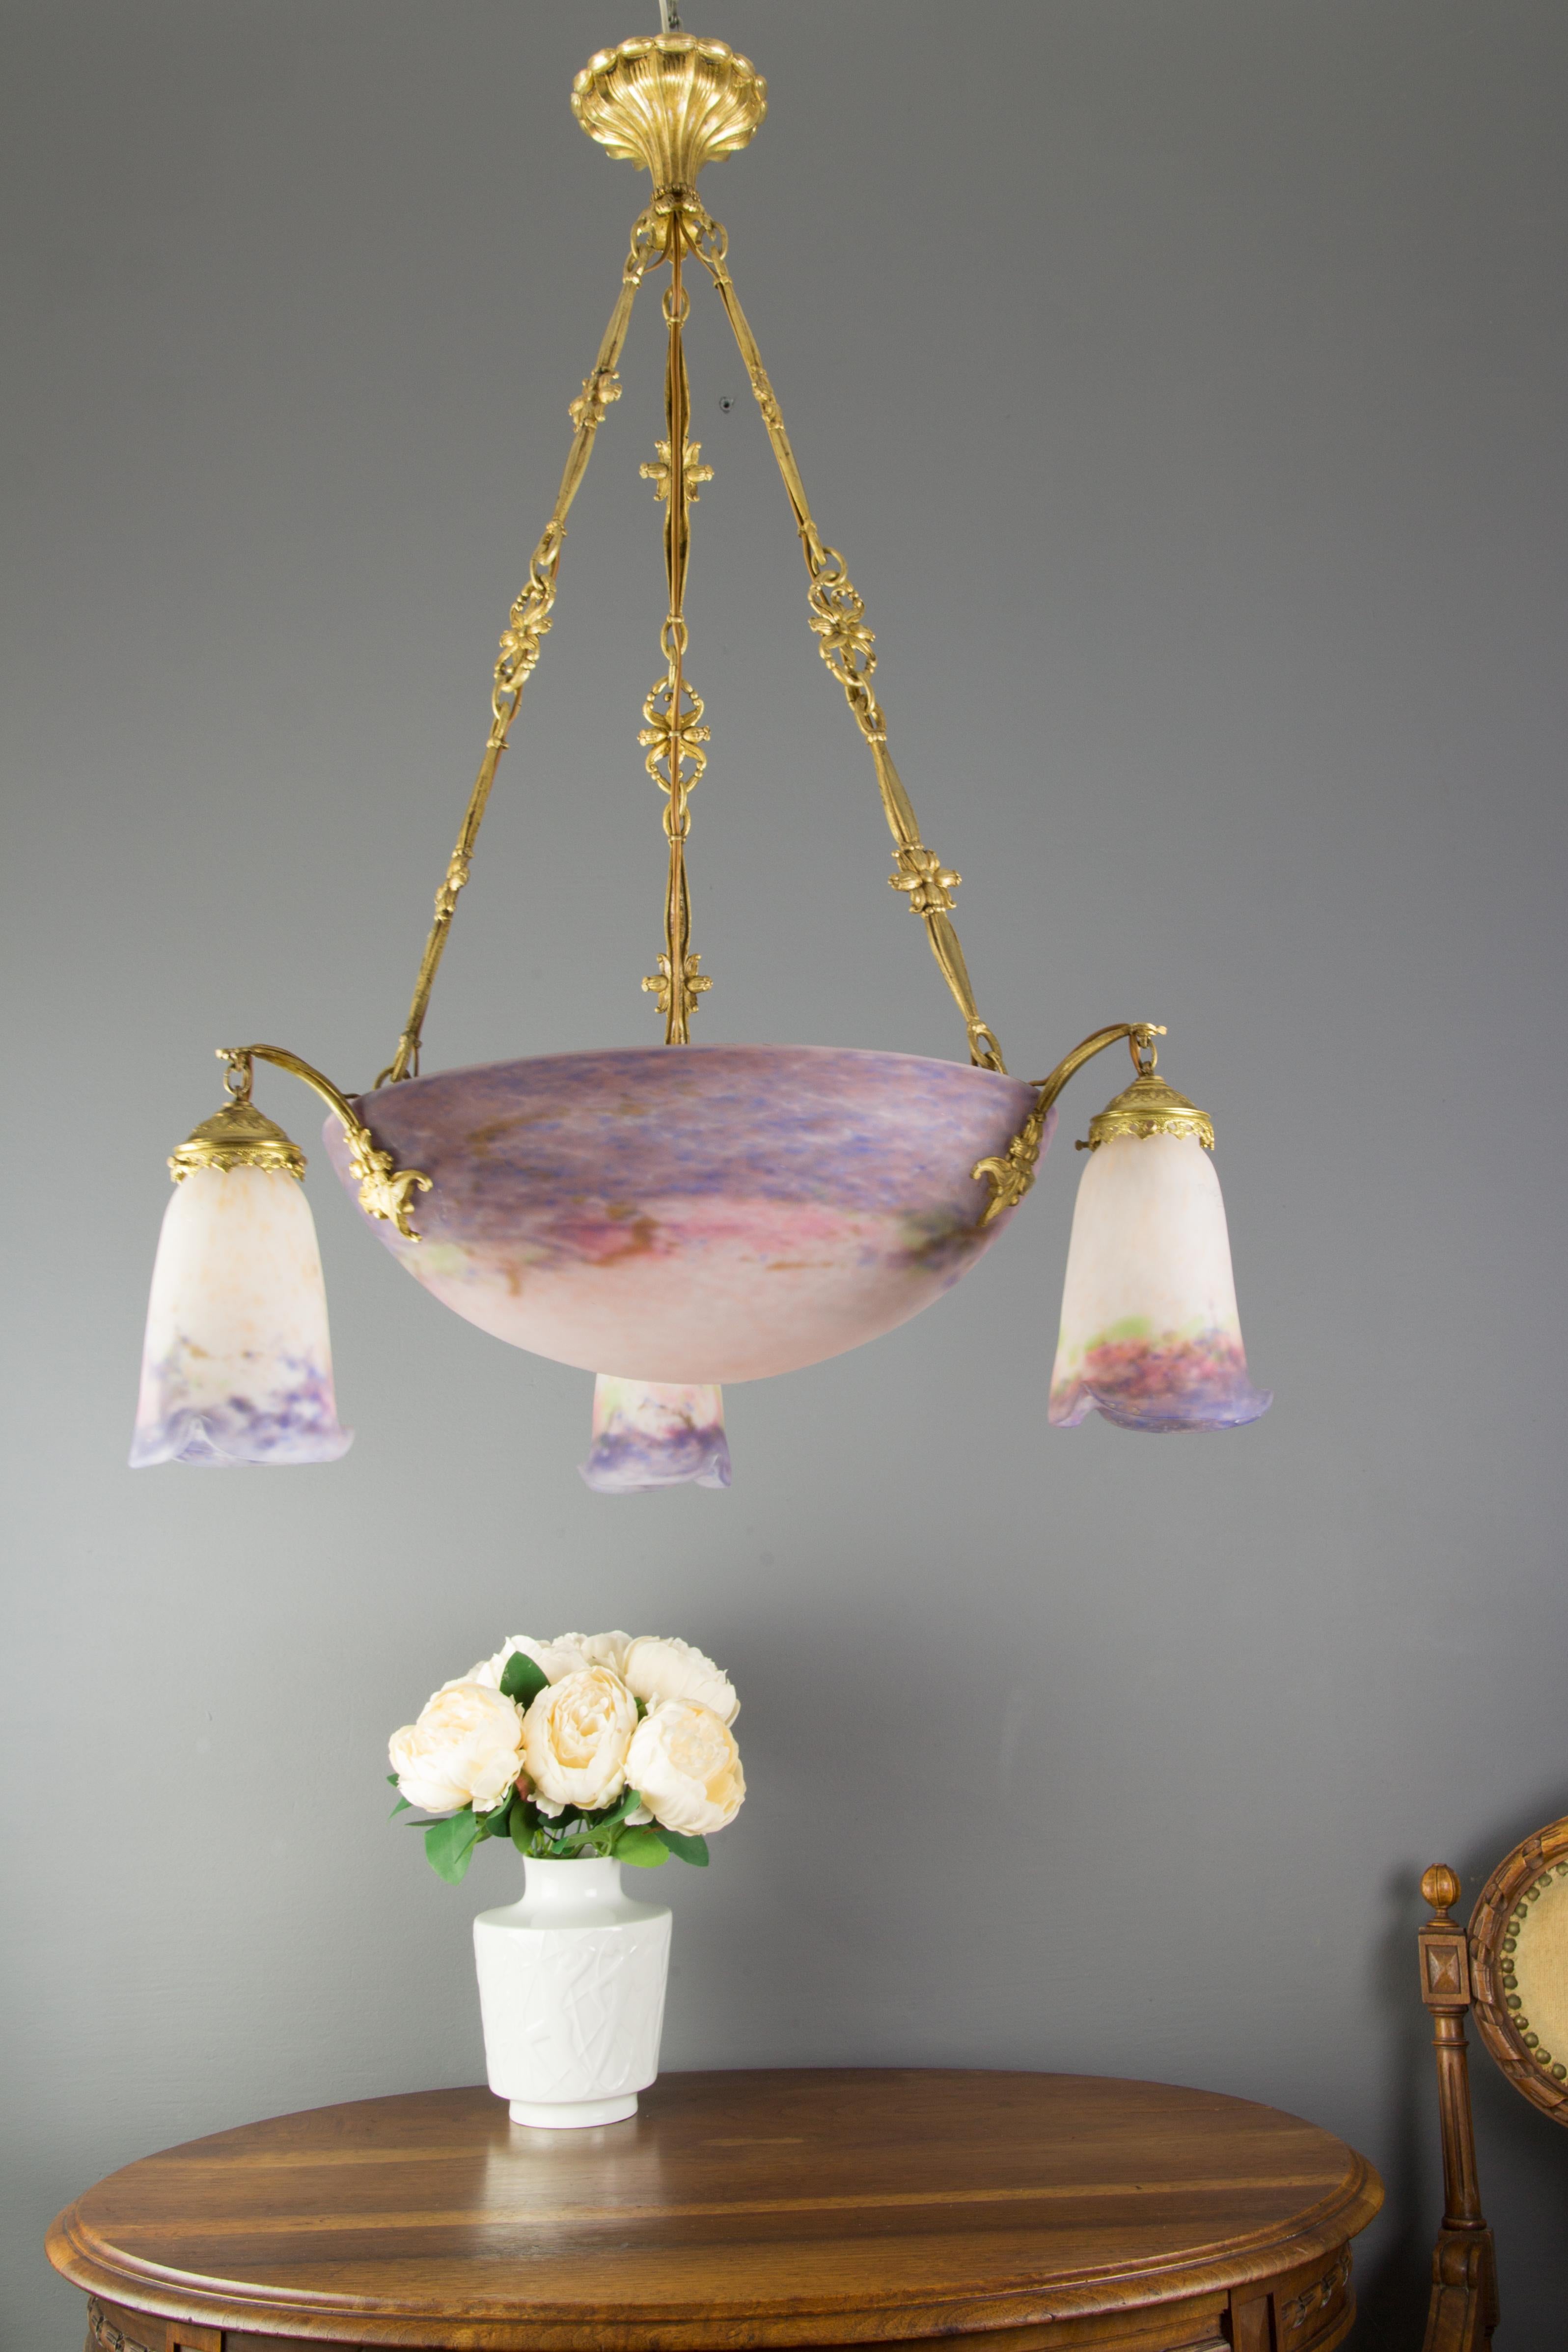 Superb French chandelier by the Muller Frères brothers, from circa the 1920s, consisting of a large (40 cm / 15.74 in) purple and white central glass bowl shade and three surrounding shades, made in “Pâte de Verre” technique. Each glass shade is